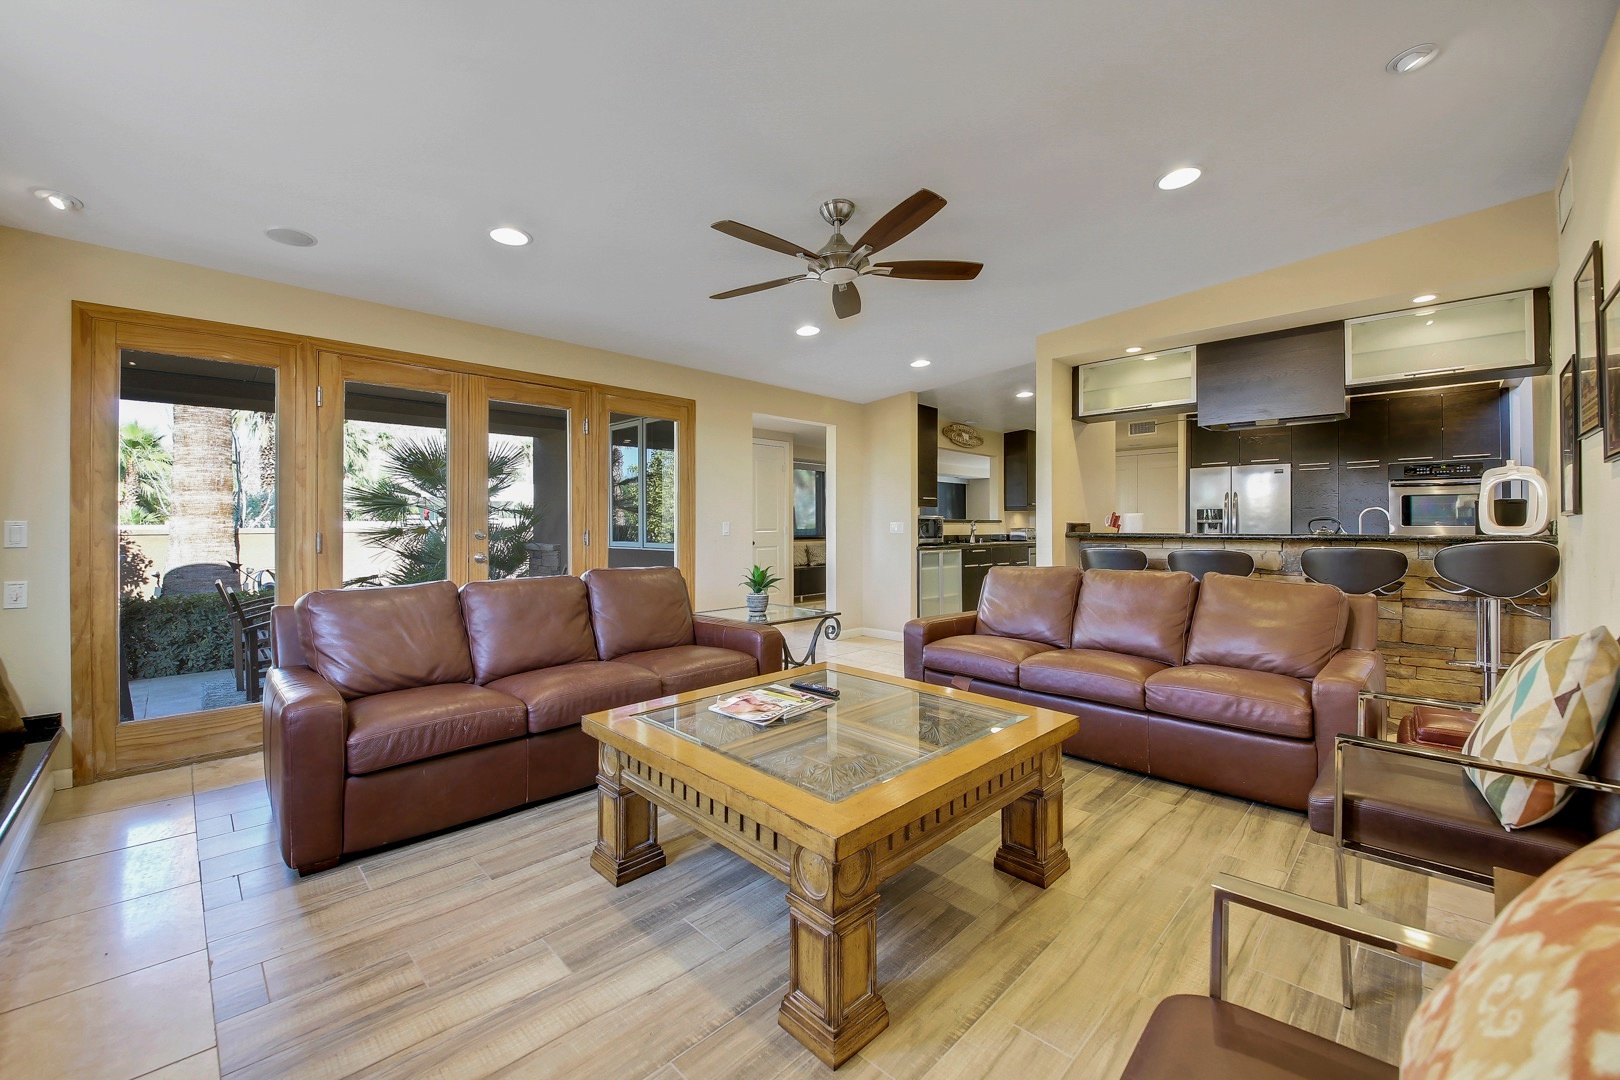 Enough space for everyone to enjoy some relaxation in the family room.